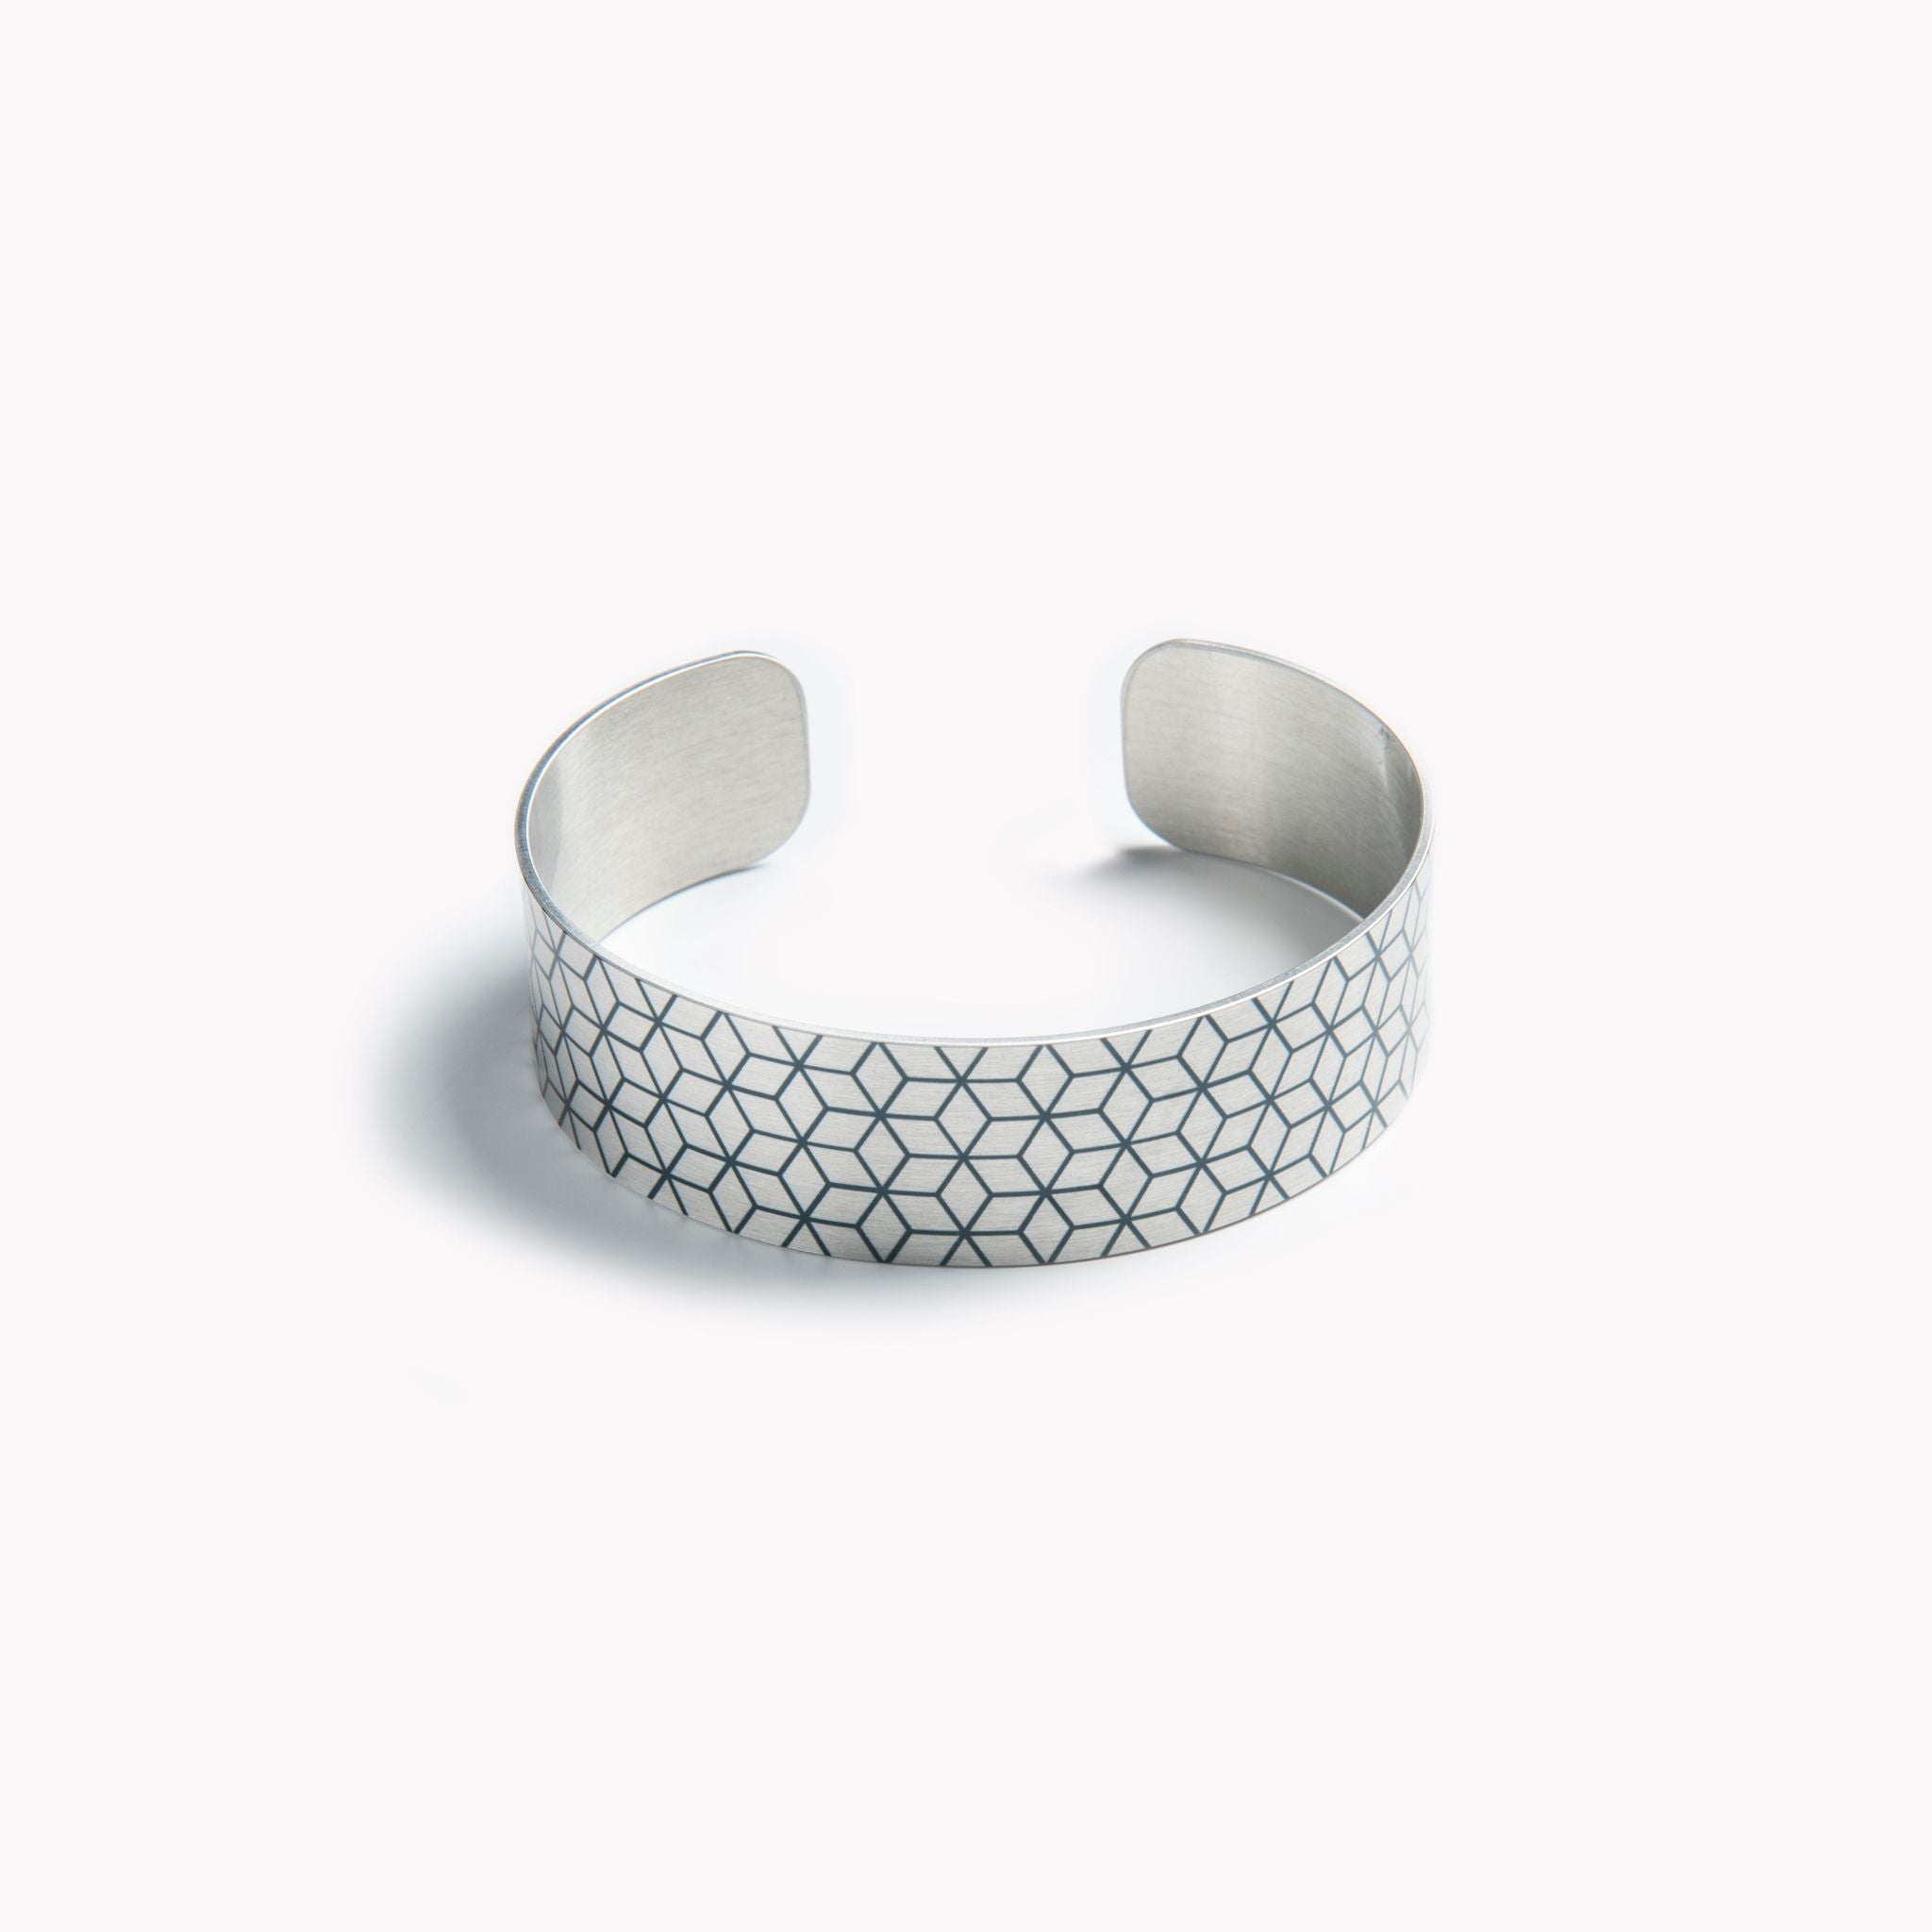 An intricately detailed cuff bracelet with a black geometric pattern.